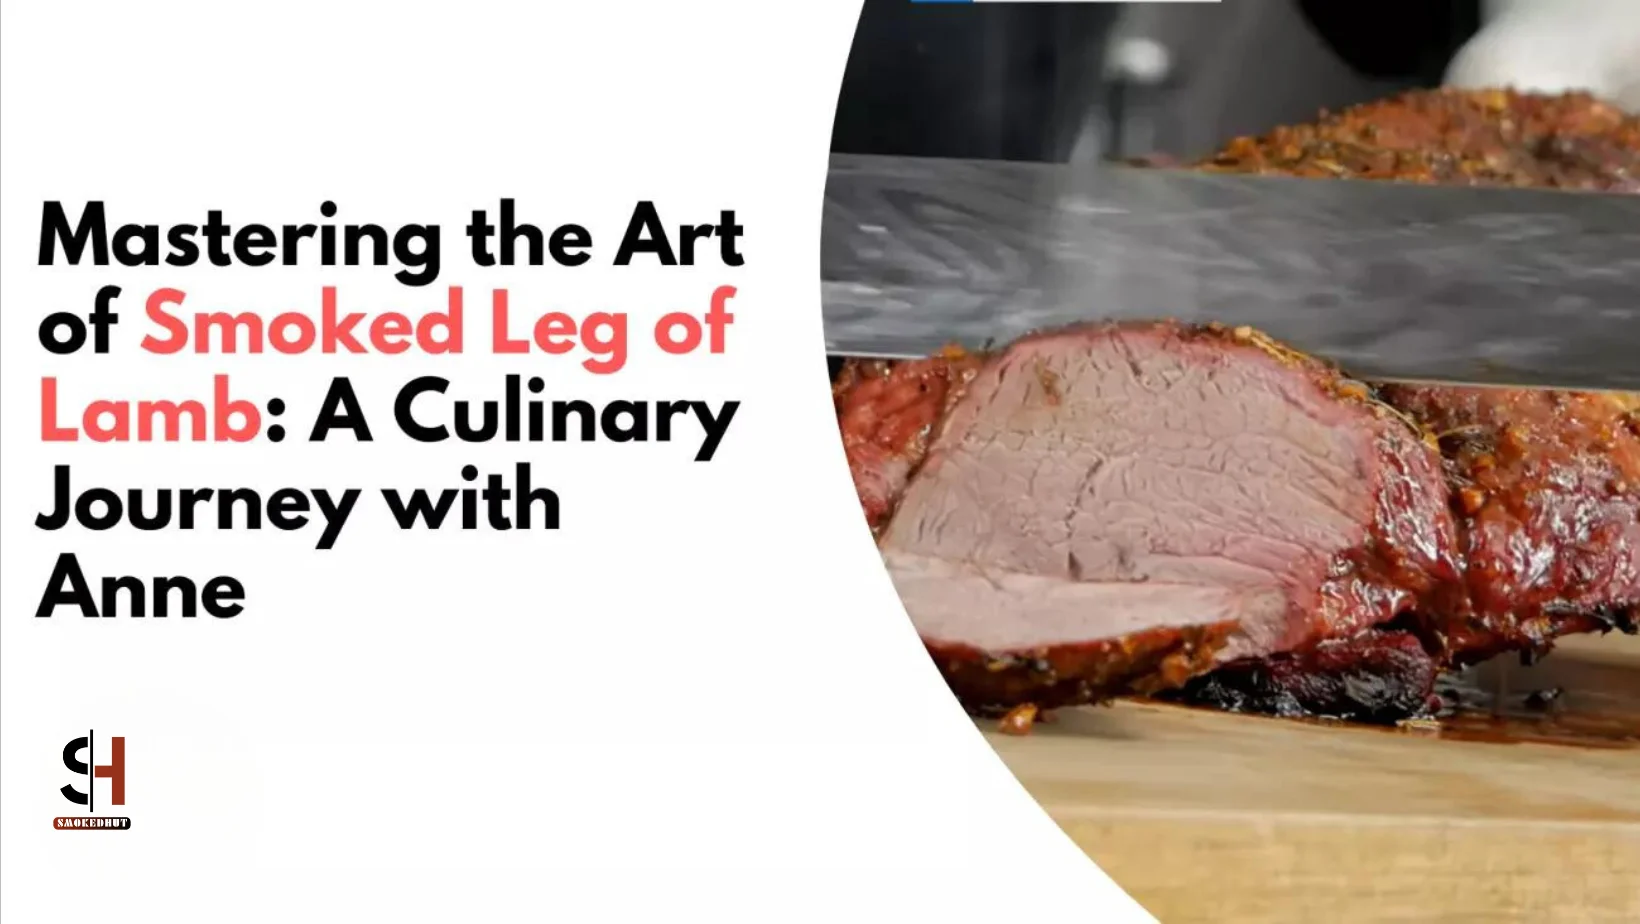 Mastering the Art of Smoked Leg of Lamb A Culinary Journey with Anne